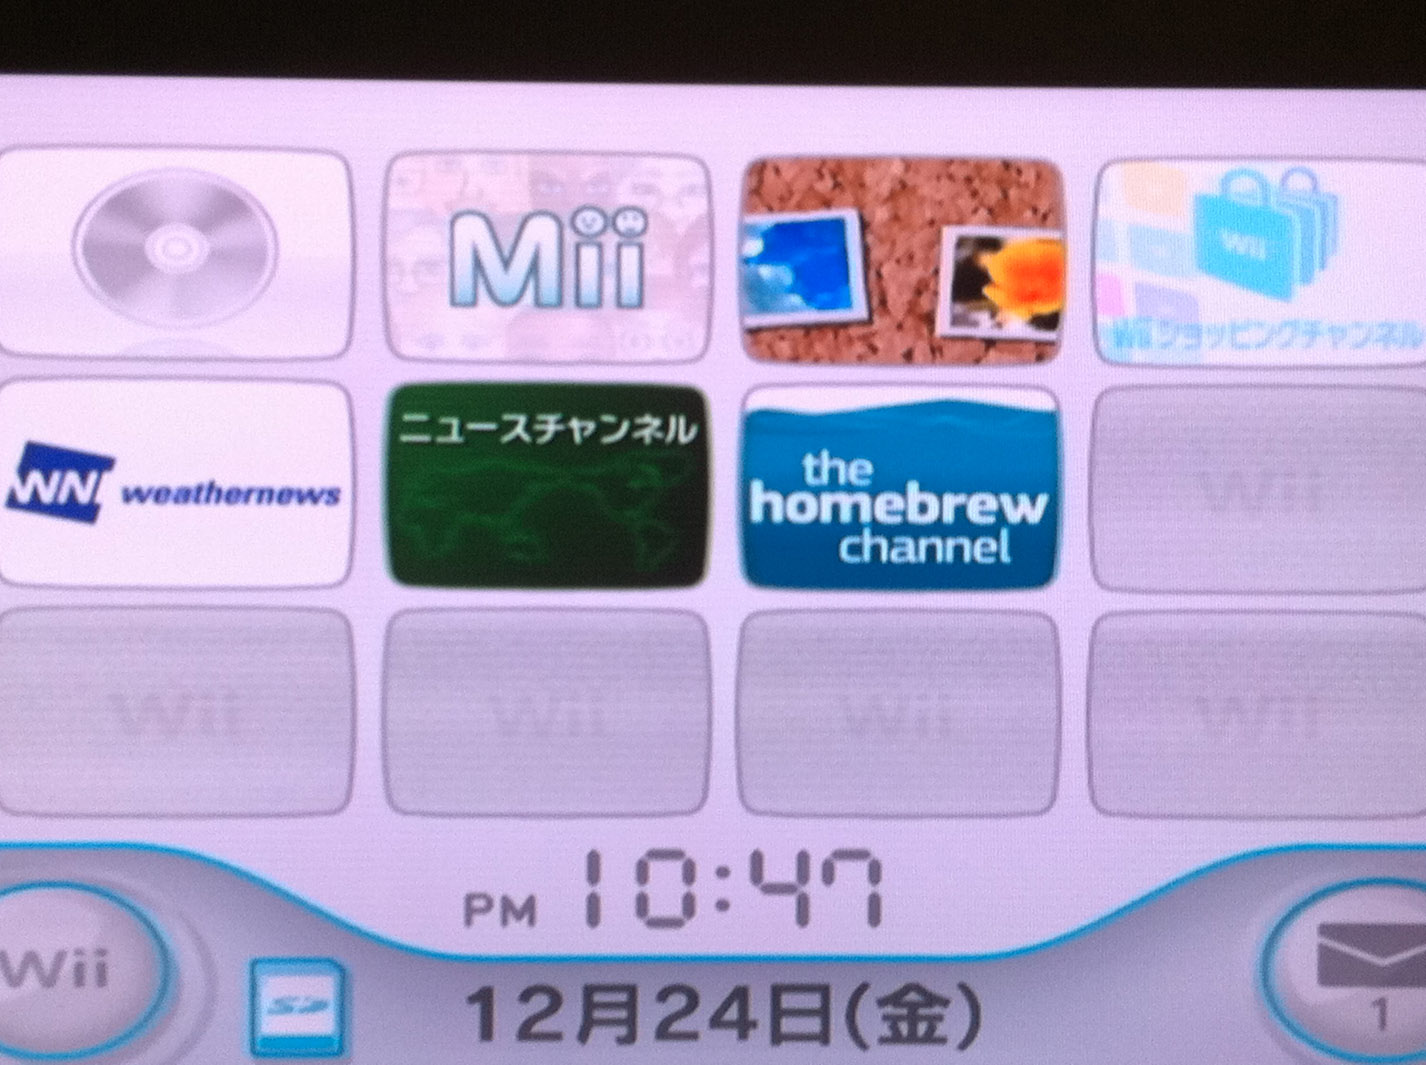 the homebrew channel wii 4.3